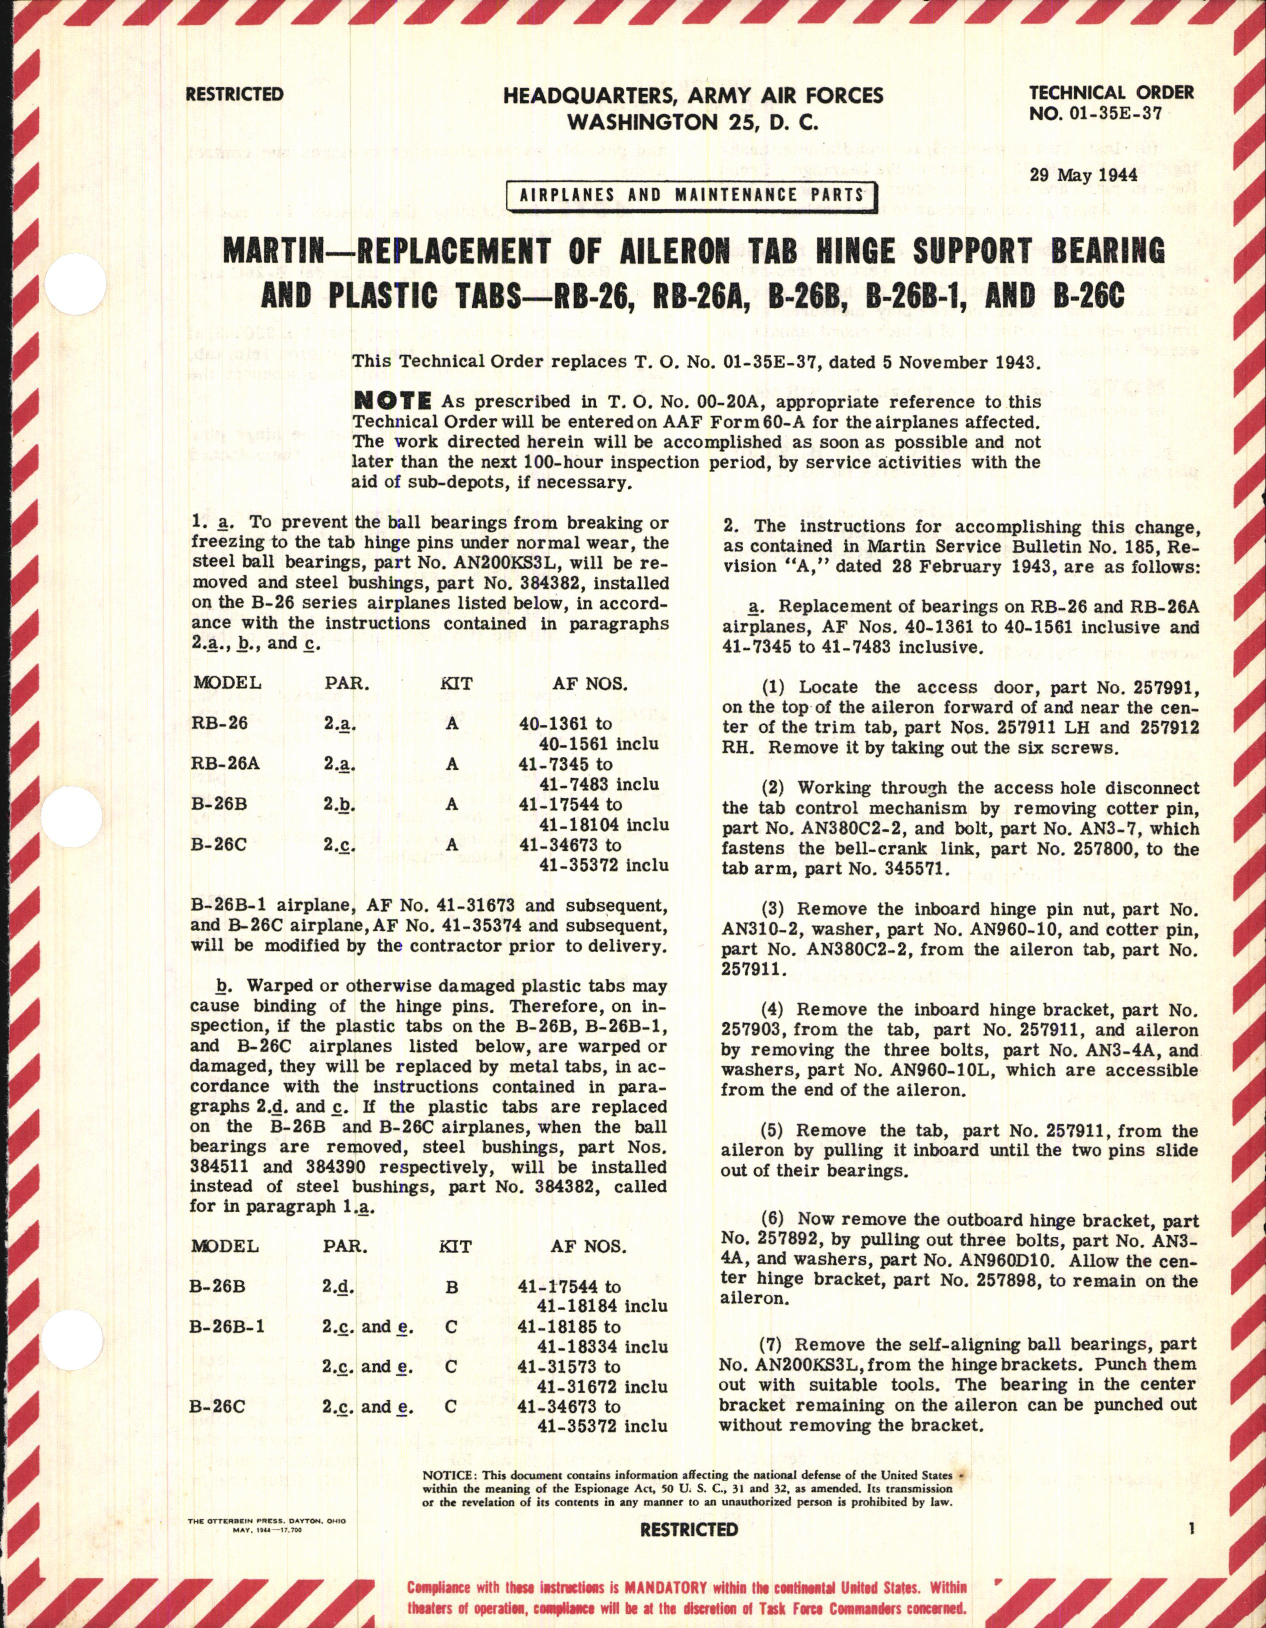 Sample page 1 from AirCorps Library document: Replacement of Aileron Tab Hinge Support Bearing and Plastic Tabs for RB-26, RB-26A, B-26B, B-26B-1, and R-26C